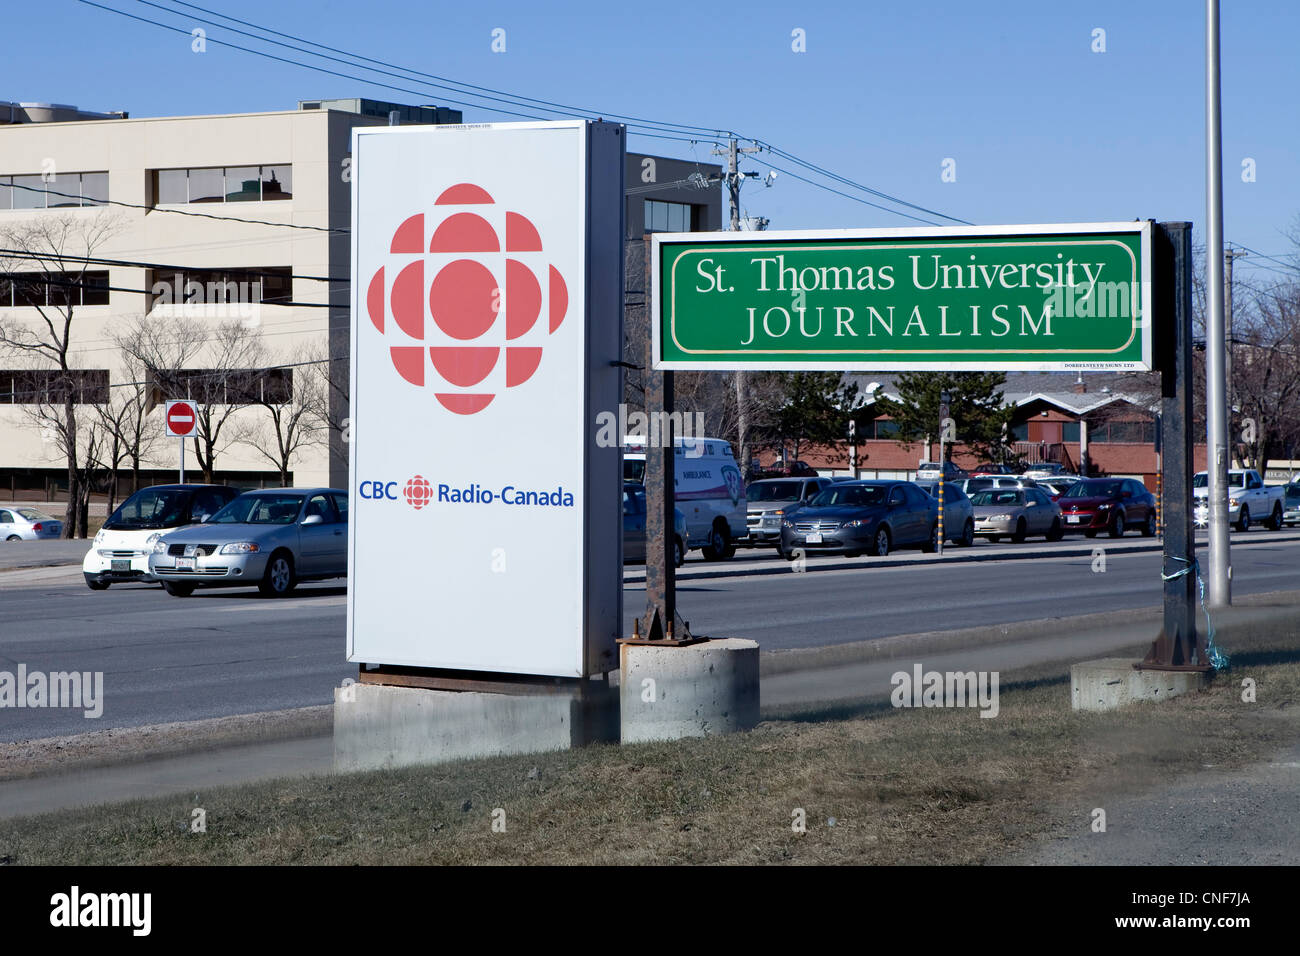 CBC / Radio Canada studio and St. Thomas journalism University are pictured in Fredericton, New Brunswick Stock Photo